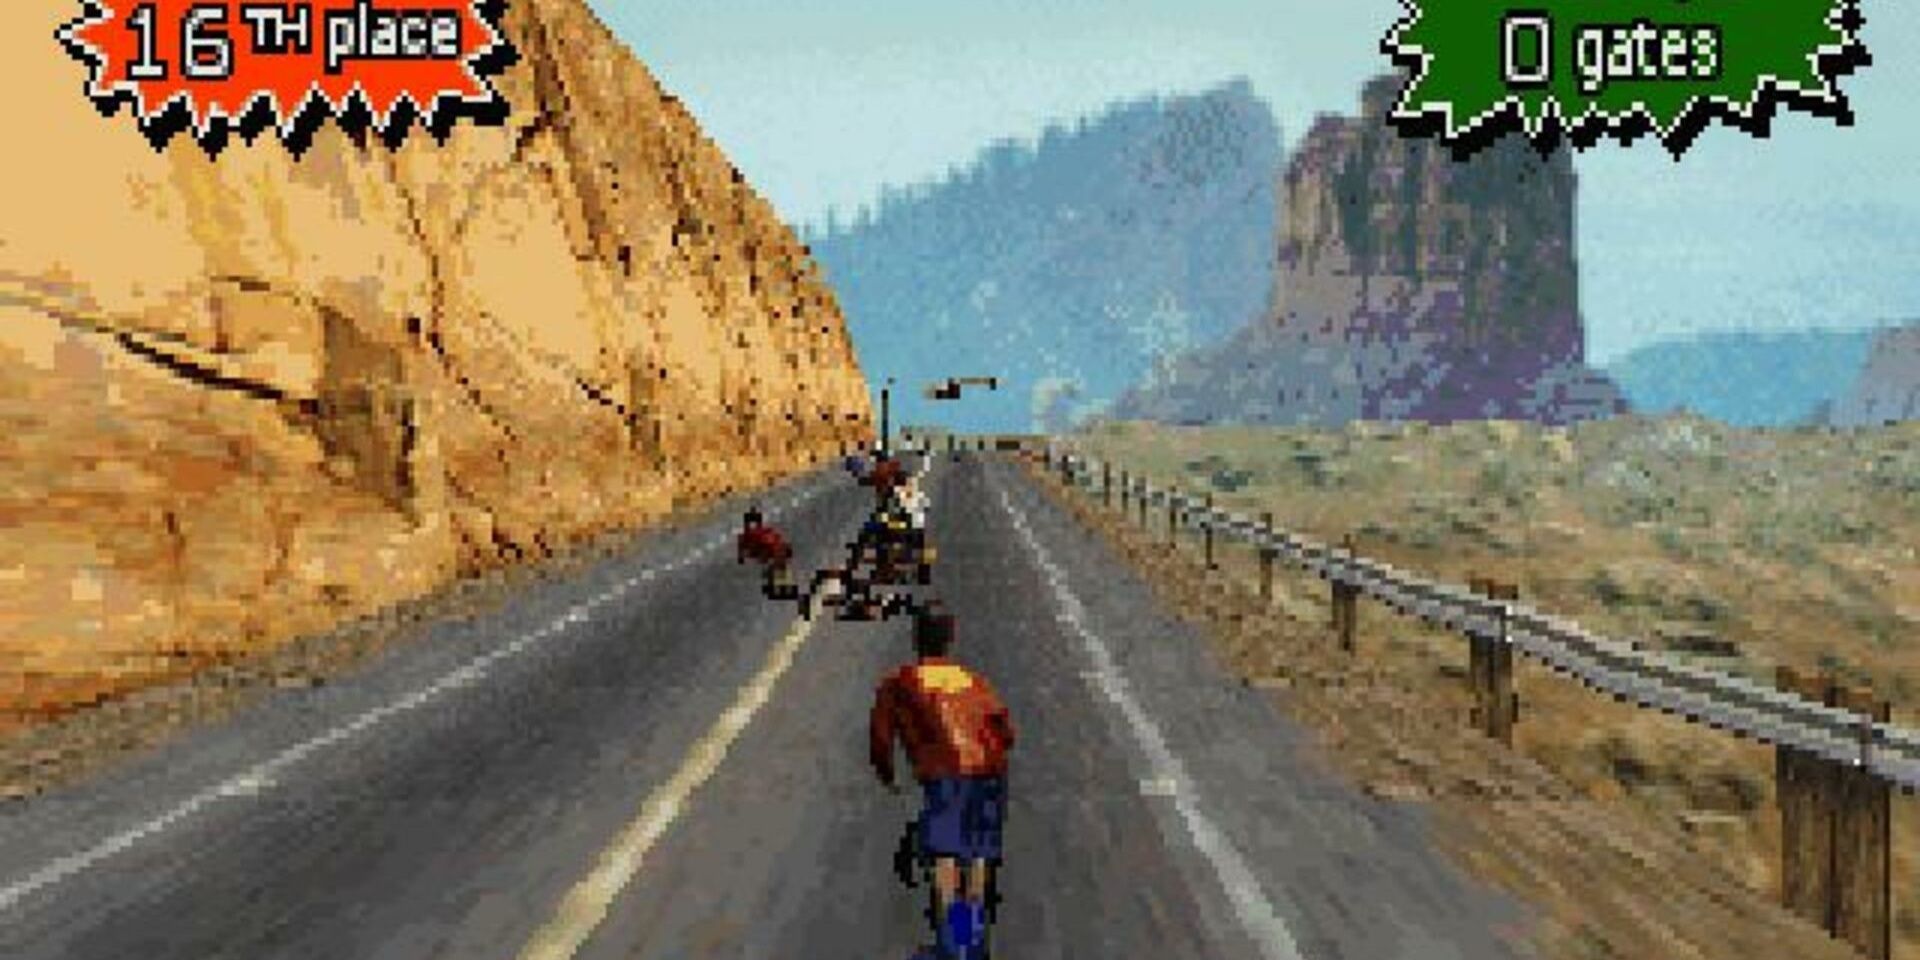 ESPN Extreme games ps1 gameplay rollerblade canyon level race racing 